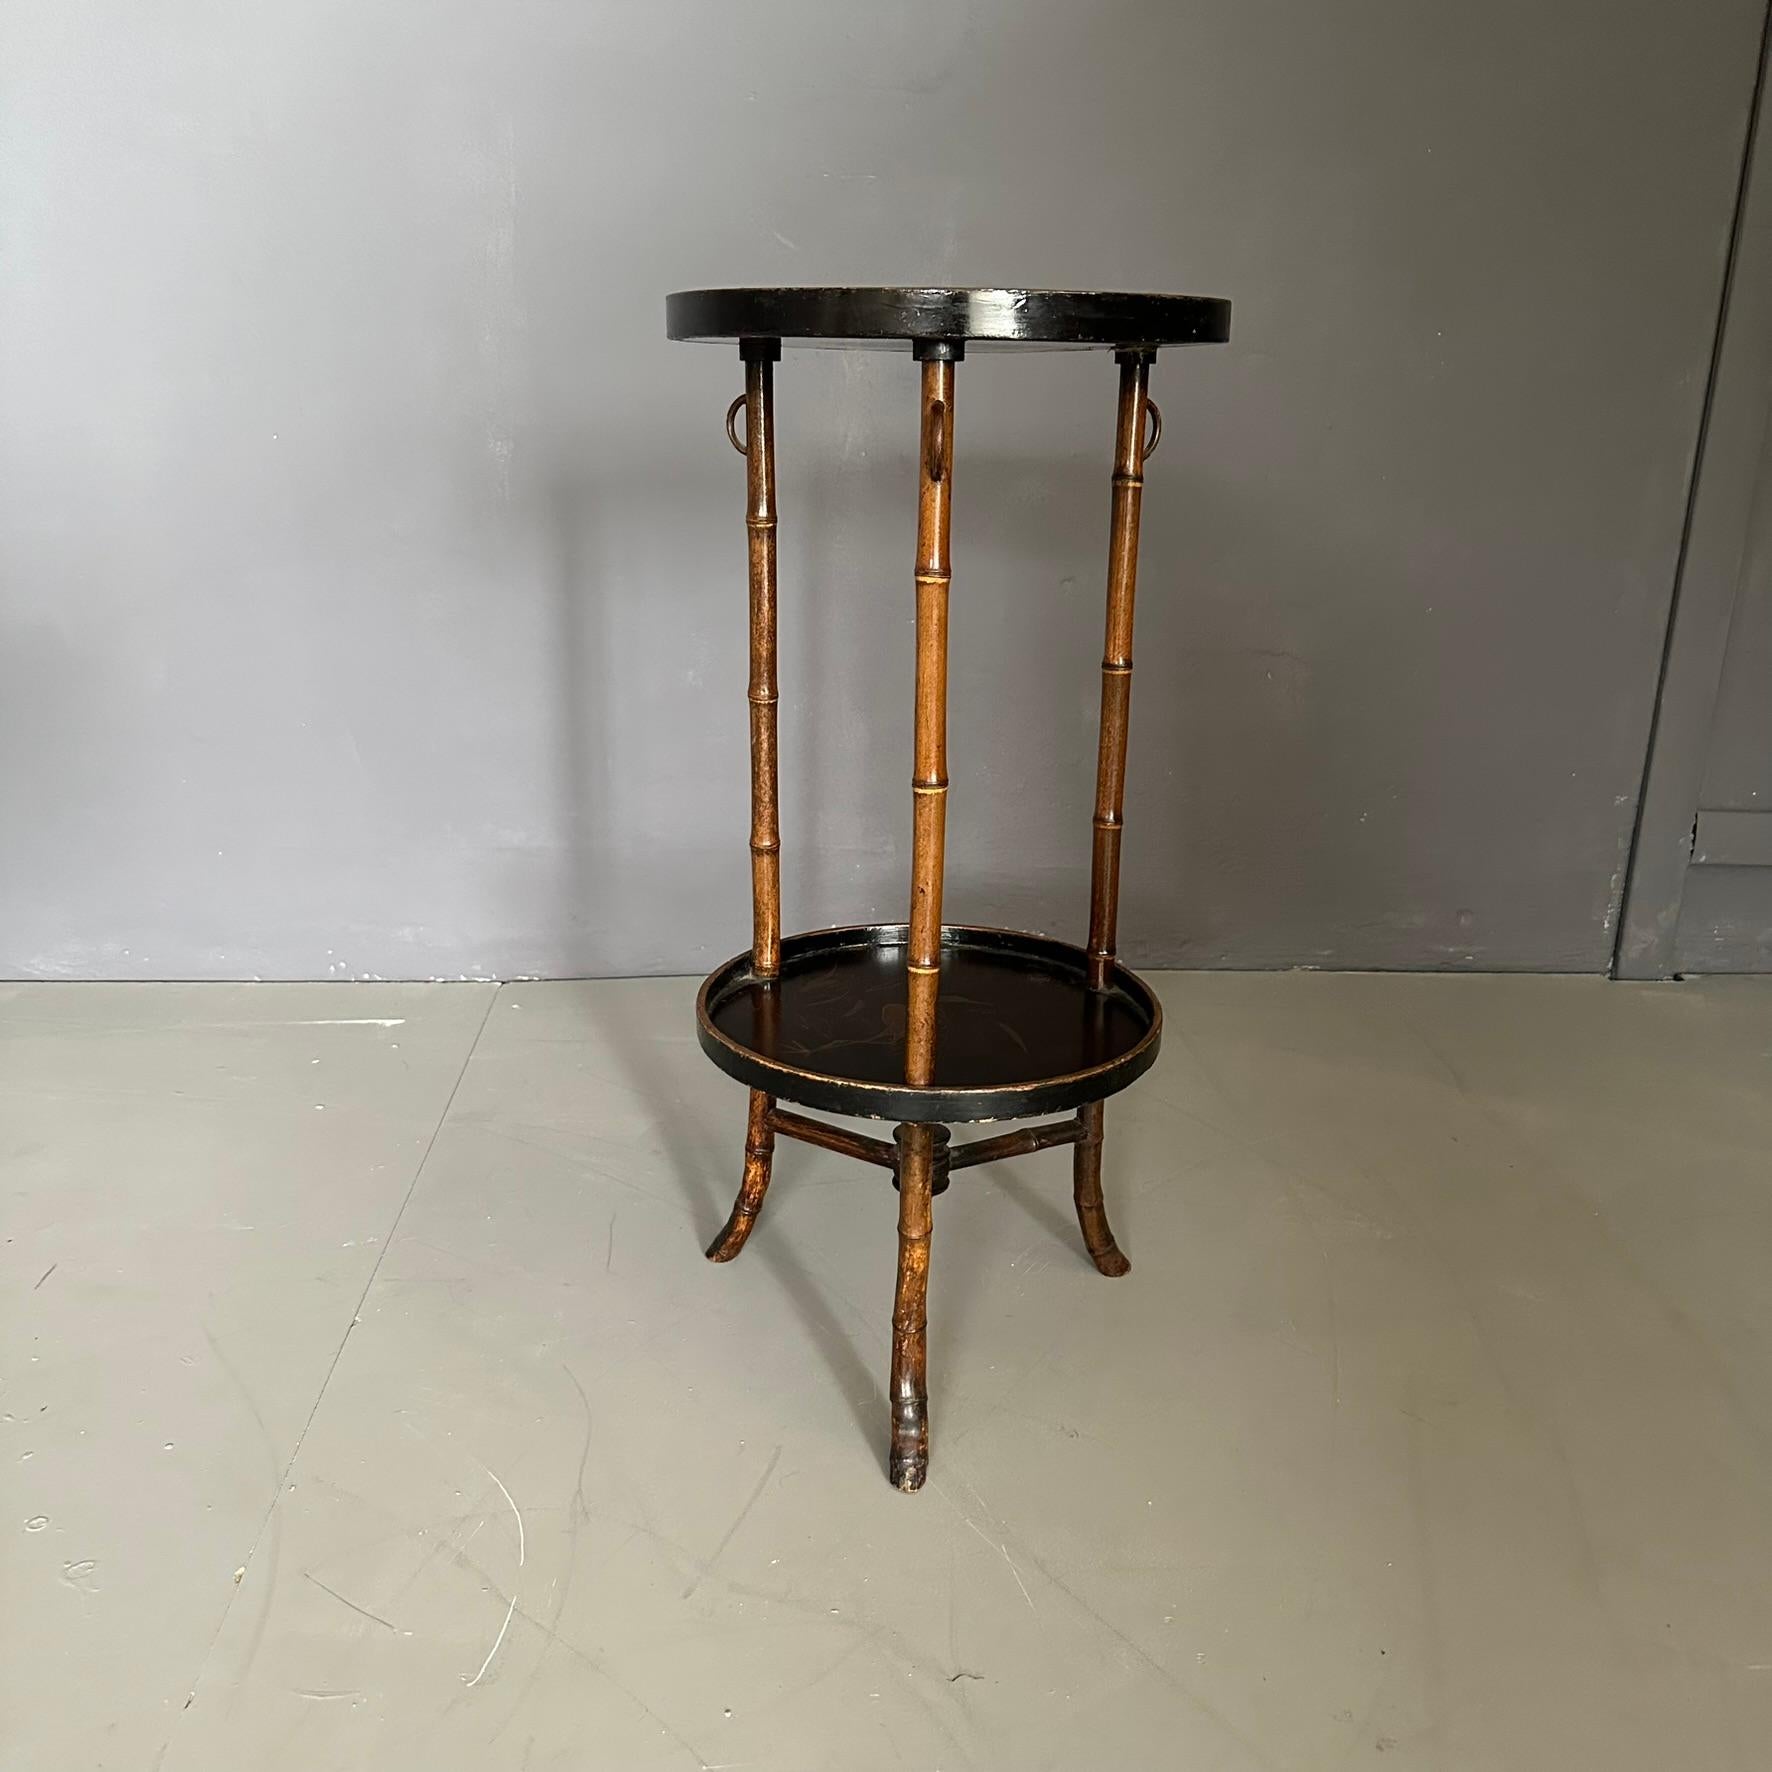 Chinese coffee table/holder, dating back to the early twentieth century.
The coffee table has a three-legged bamboo structure with round black-plated wooden tops with naturalistic designs.
The table tops represent naturalistic scenes and landscapes.